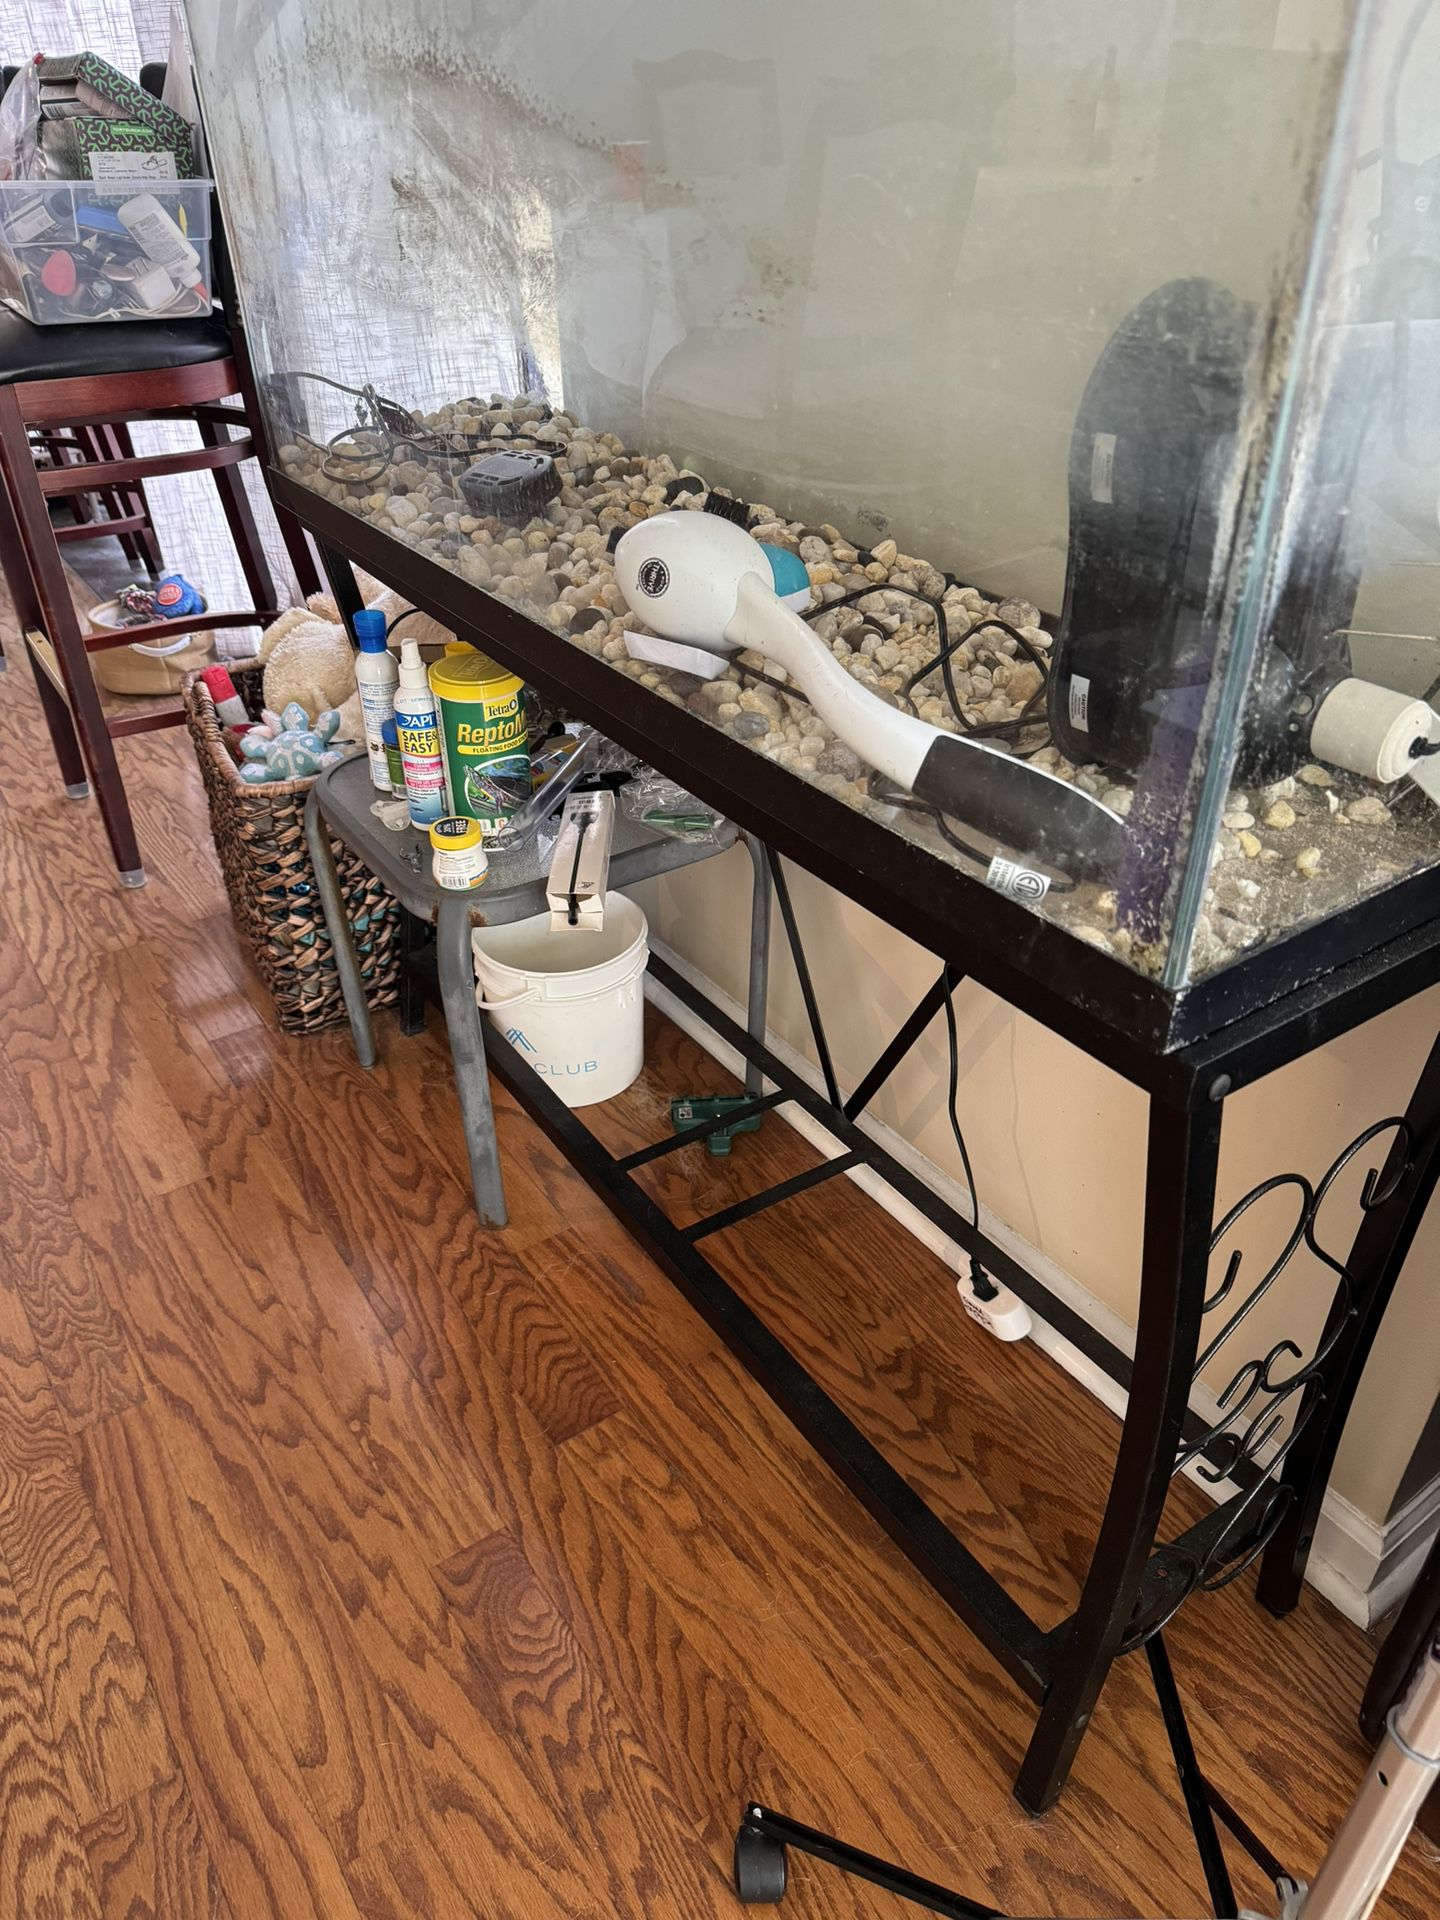 50 Gal Fish Tank - Everything Included- Originally $395.  Asking $60